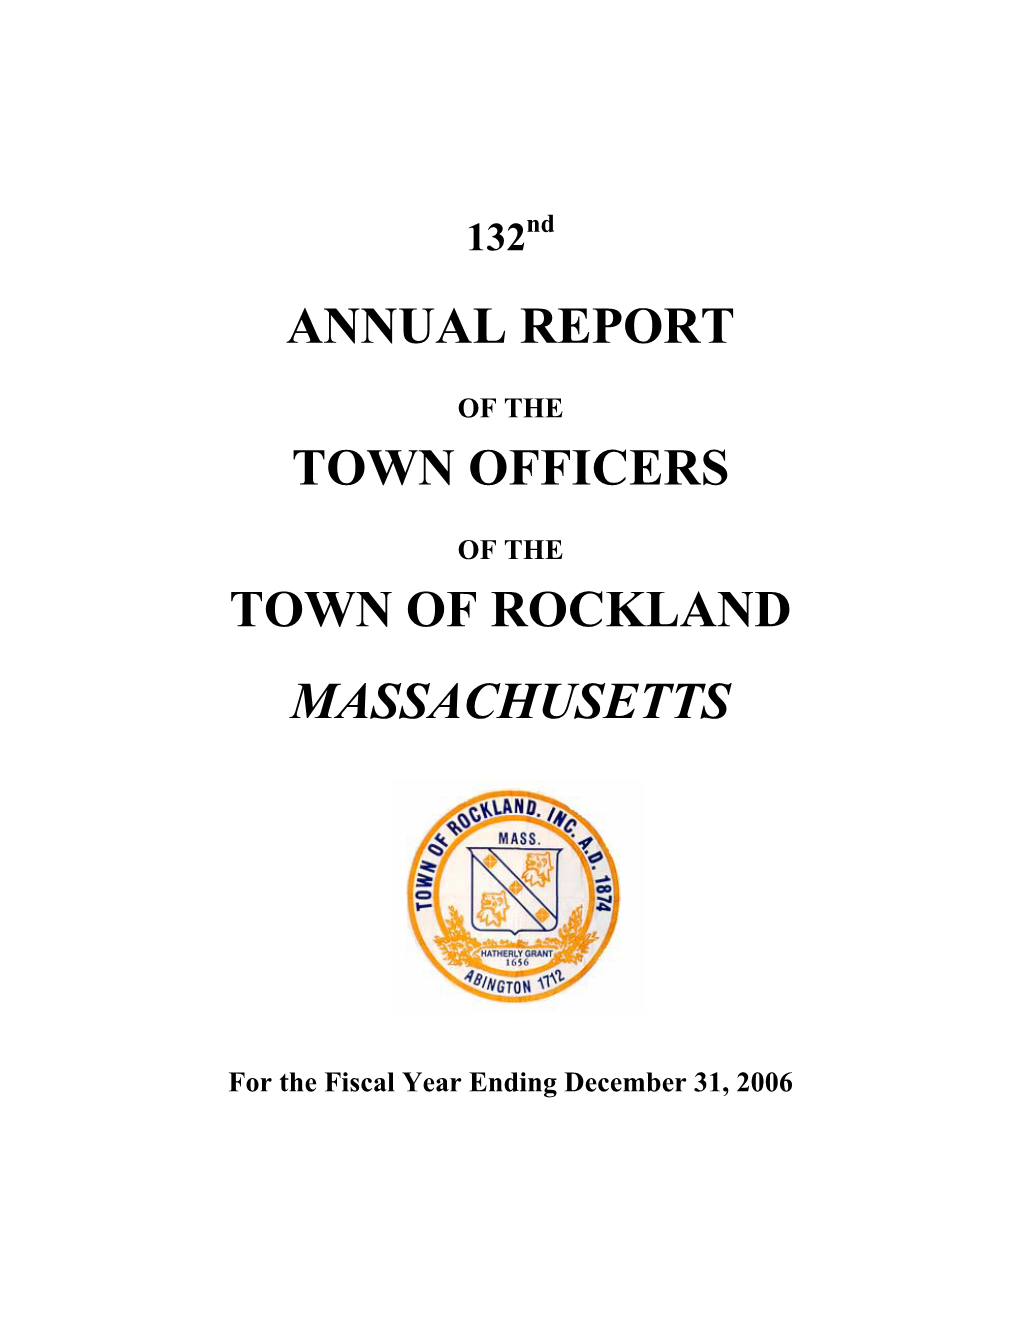 Annual Report Town Officers Town of Rockland Massachusetts